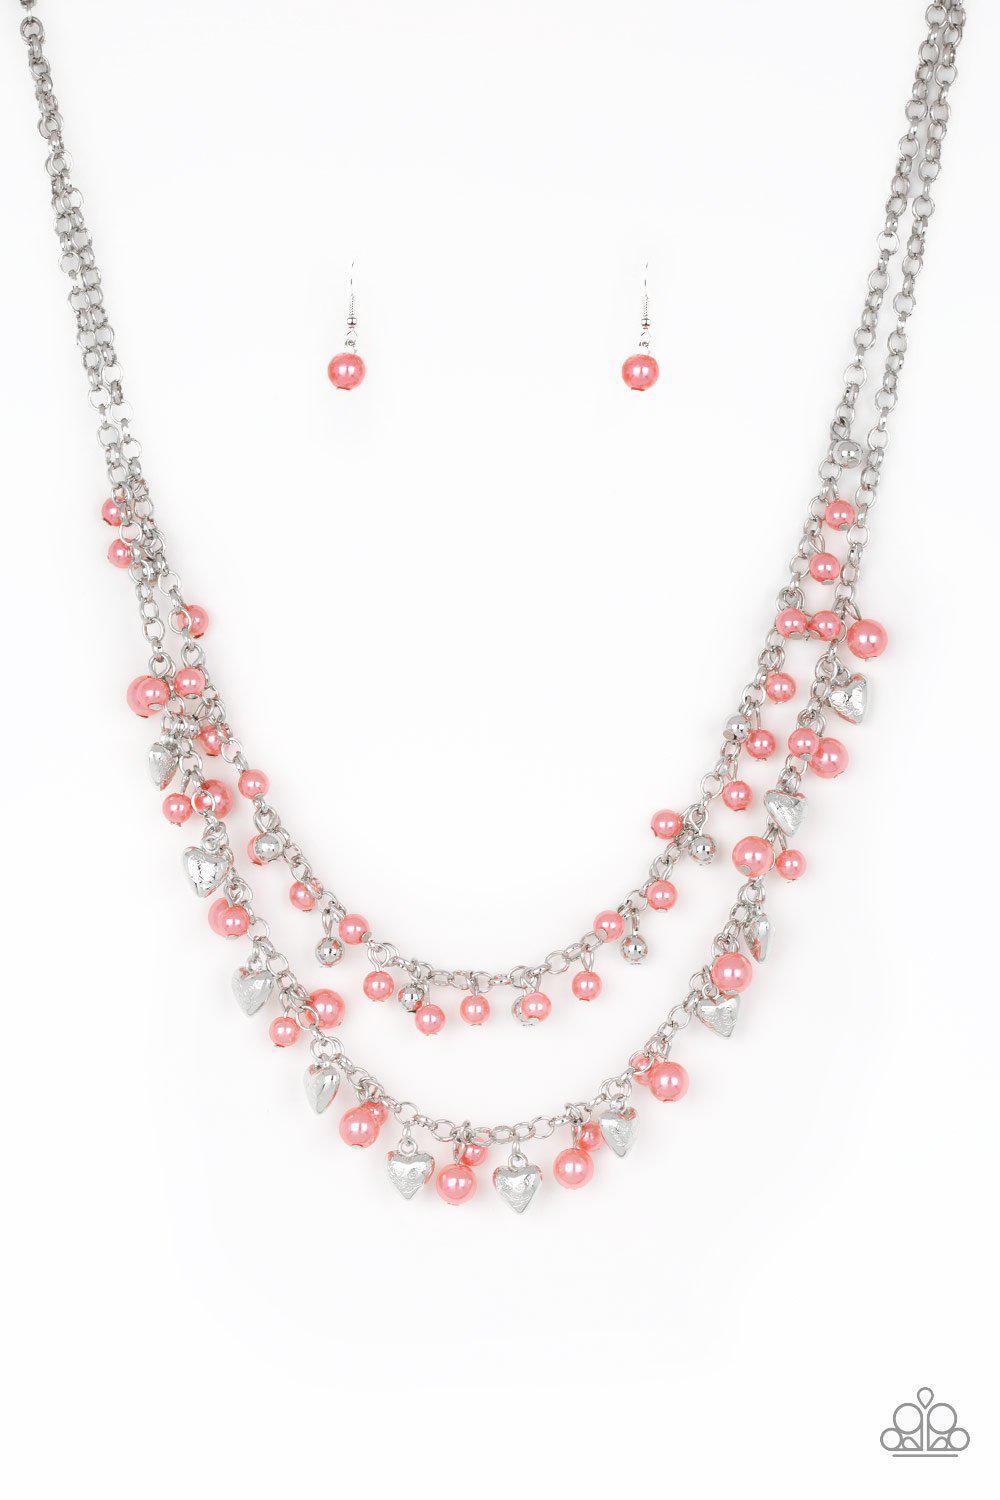 Kindhearted Heart Coral Pearl and Silver Heart Necklace - Paparazzi Accessories-CarasShop.com - $5 Jewelry by Cara Jewels